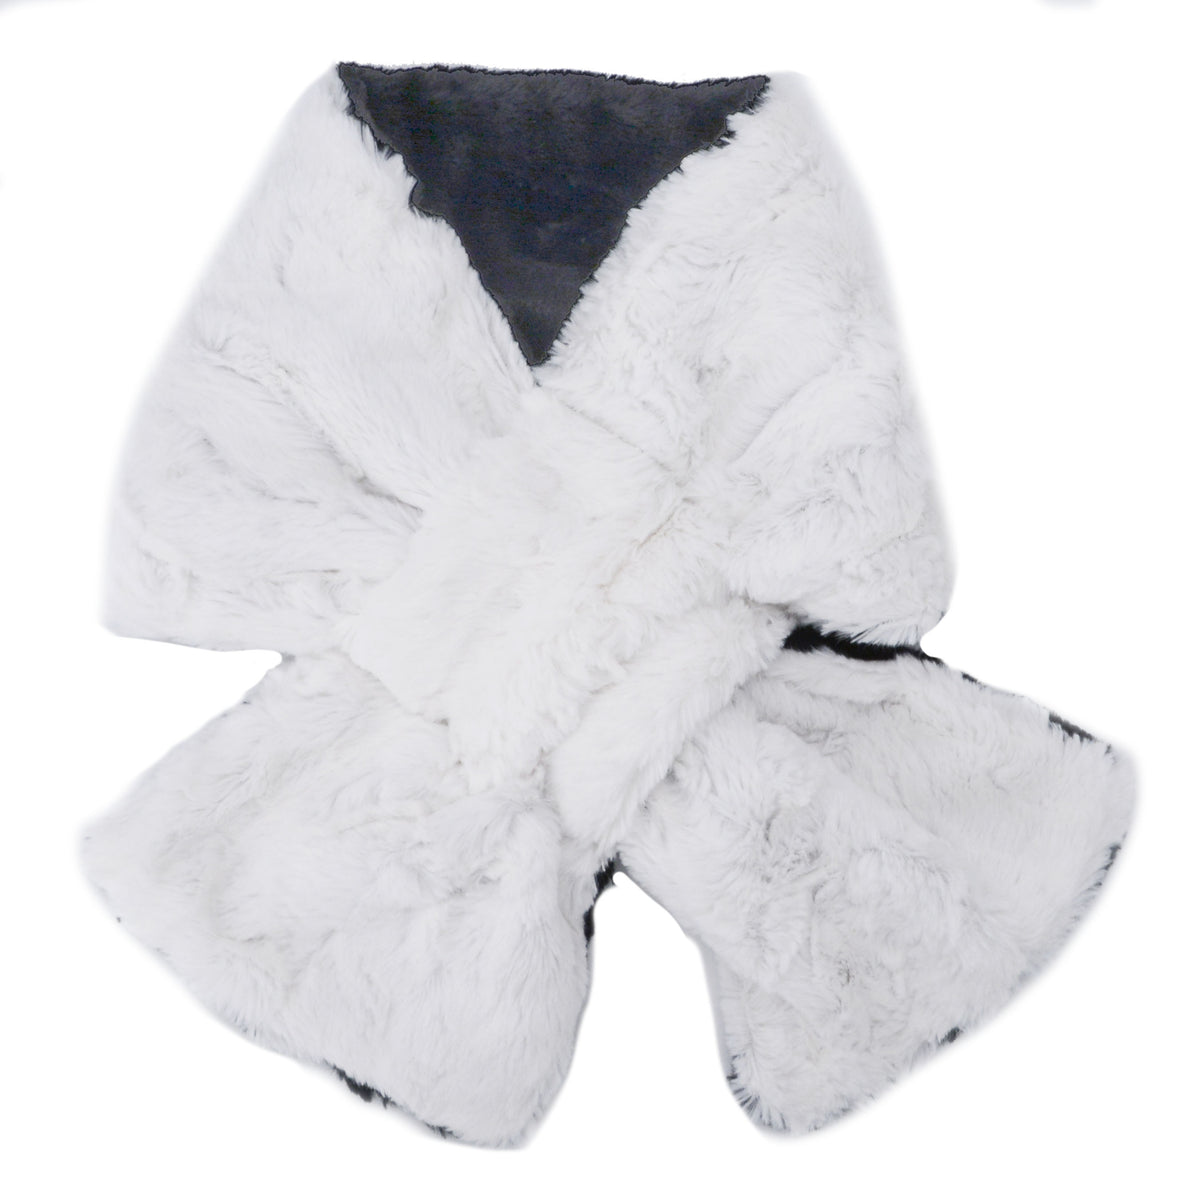 Pull-Thru Scarf - Cuddly Faux Furs in Two Tone Combos